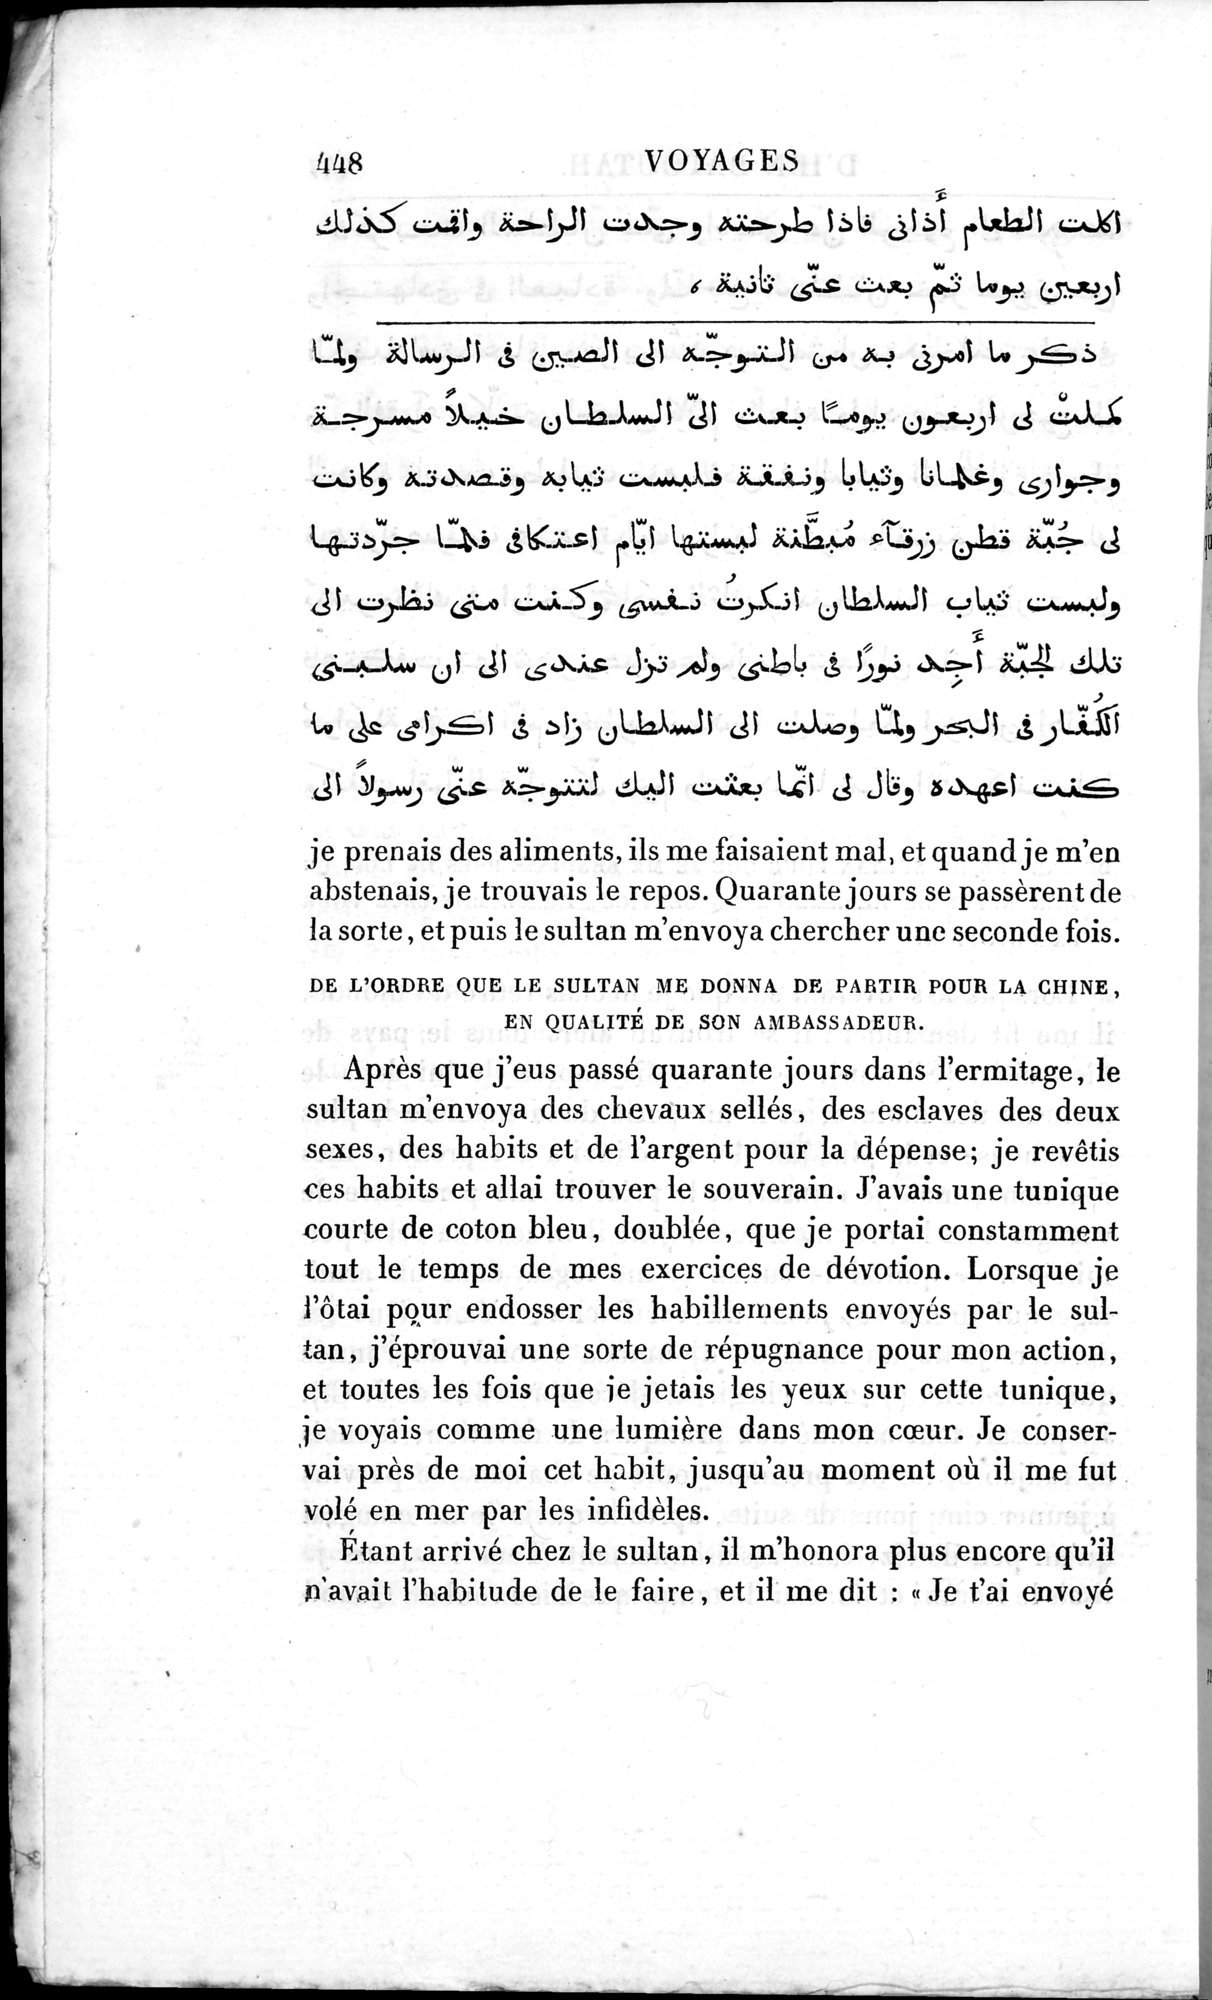 Voyages d'Ibn Batoutah : vol.3 / Page 488 (Grayscale High Resolution Image)